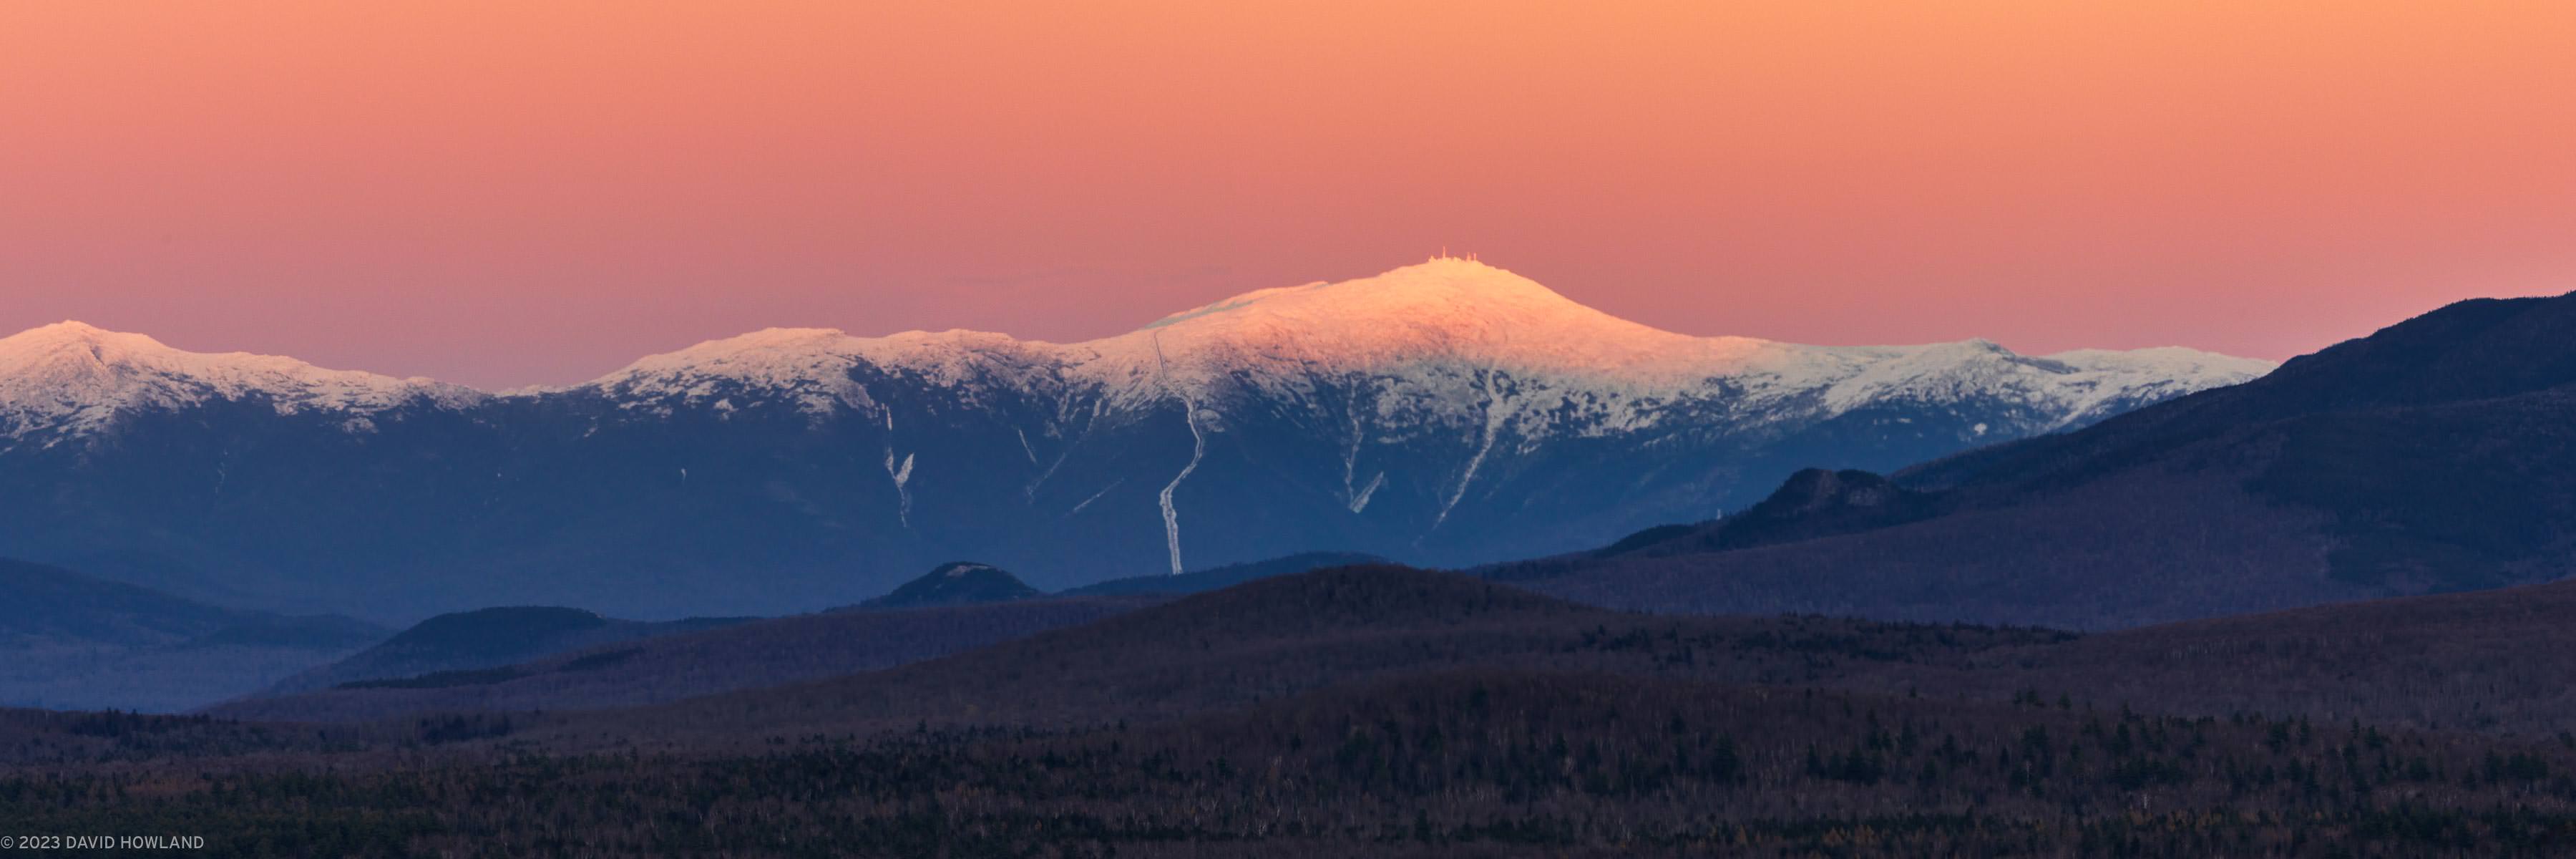 A panorama photo of sunset making the snow-covered Presidential mountain range in the White Mountains of New Hampshire glow orange.